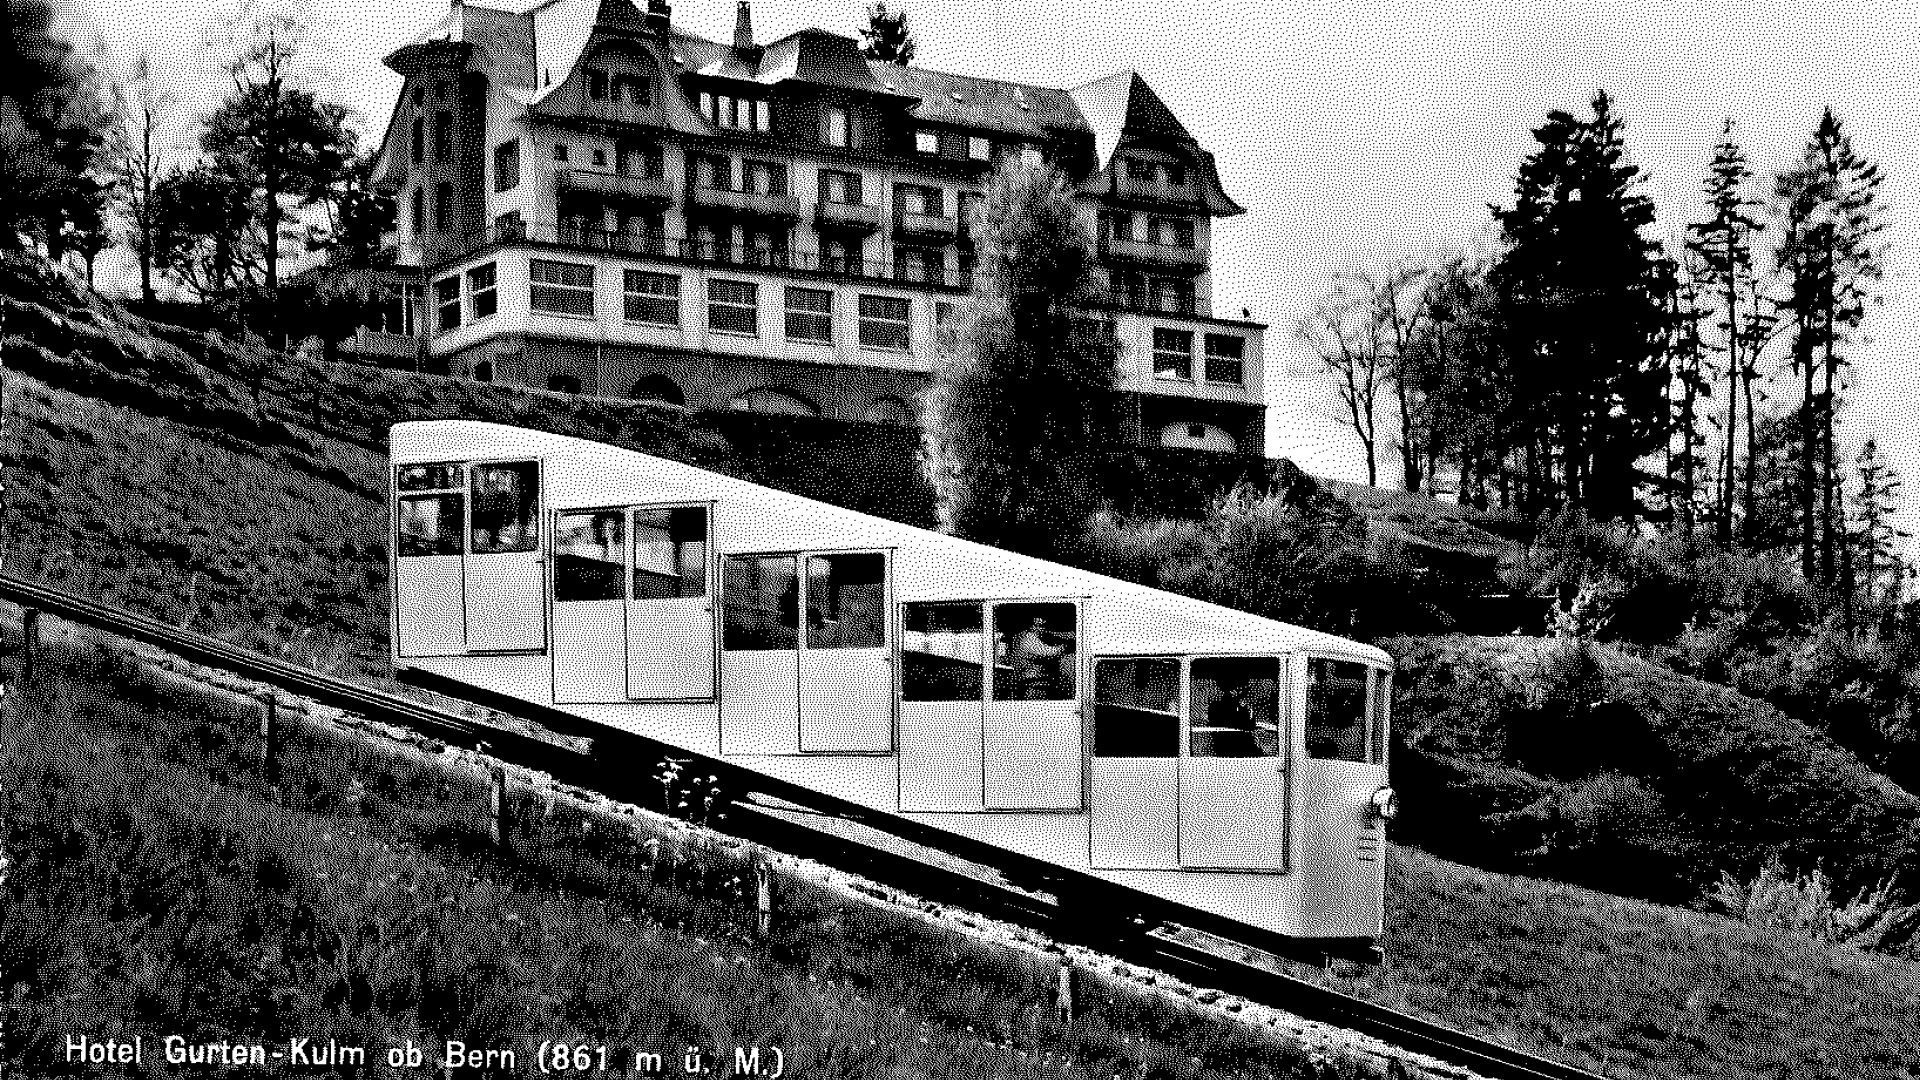 The Gurten funicular was refurbished and looked very modern for its time.